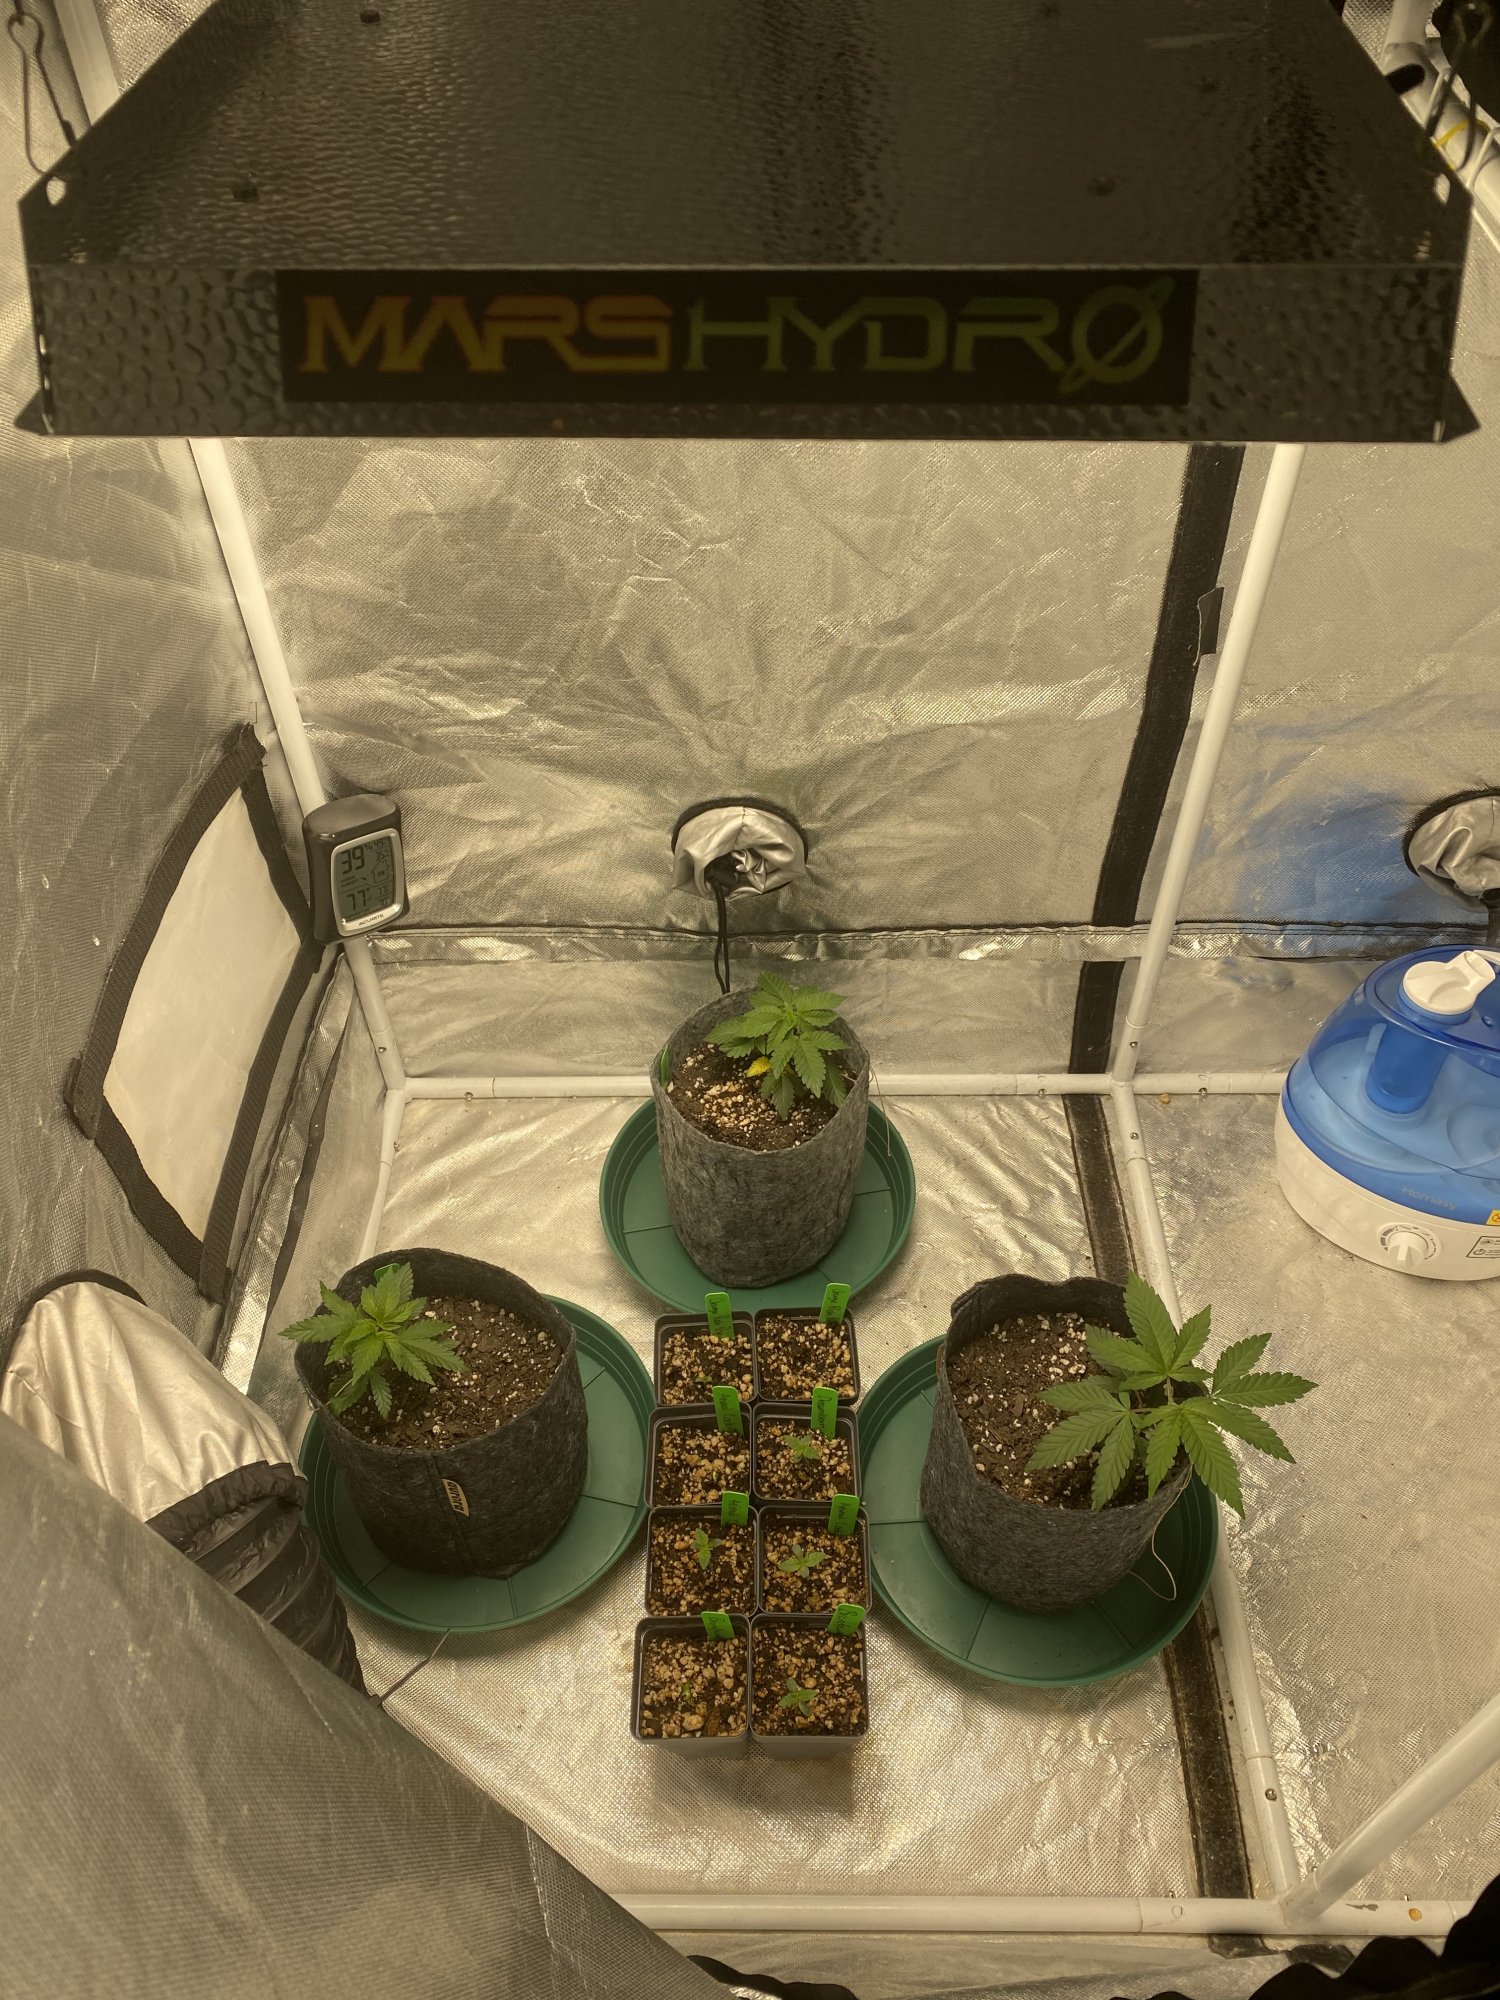 Mars hydro ts600watering questions